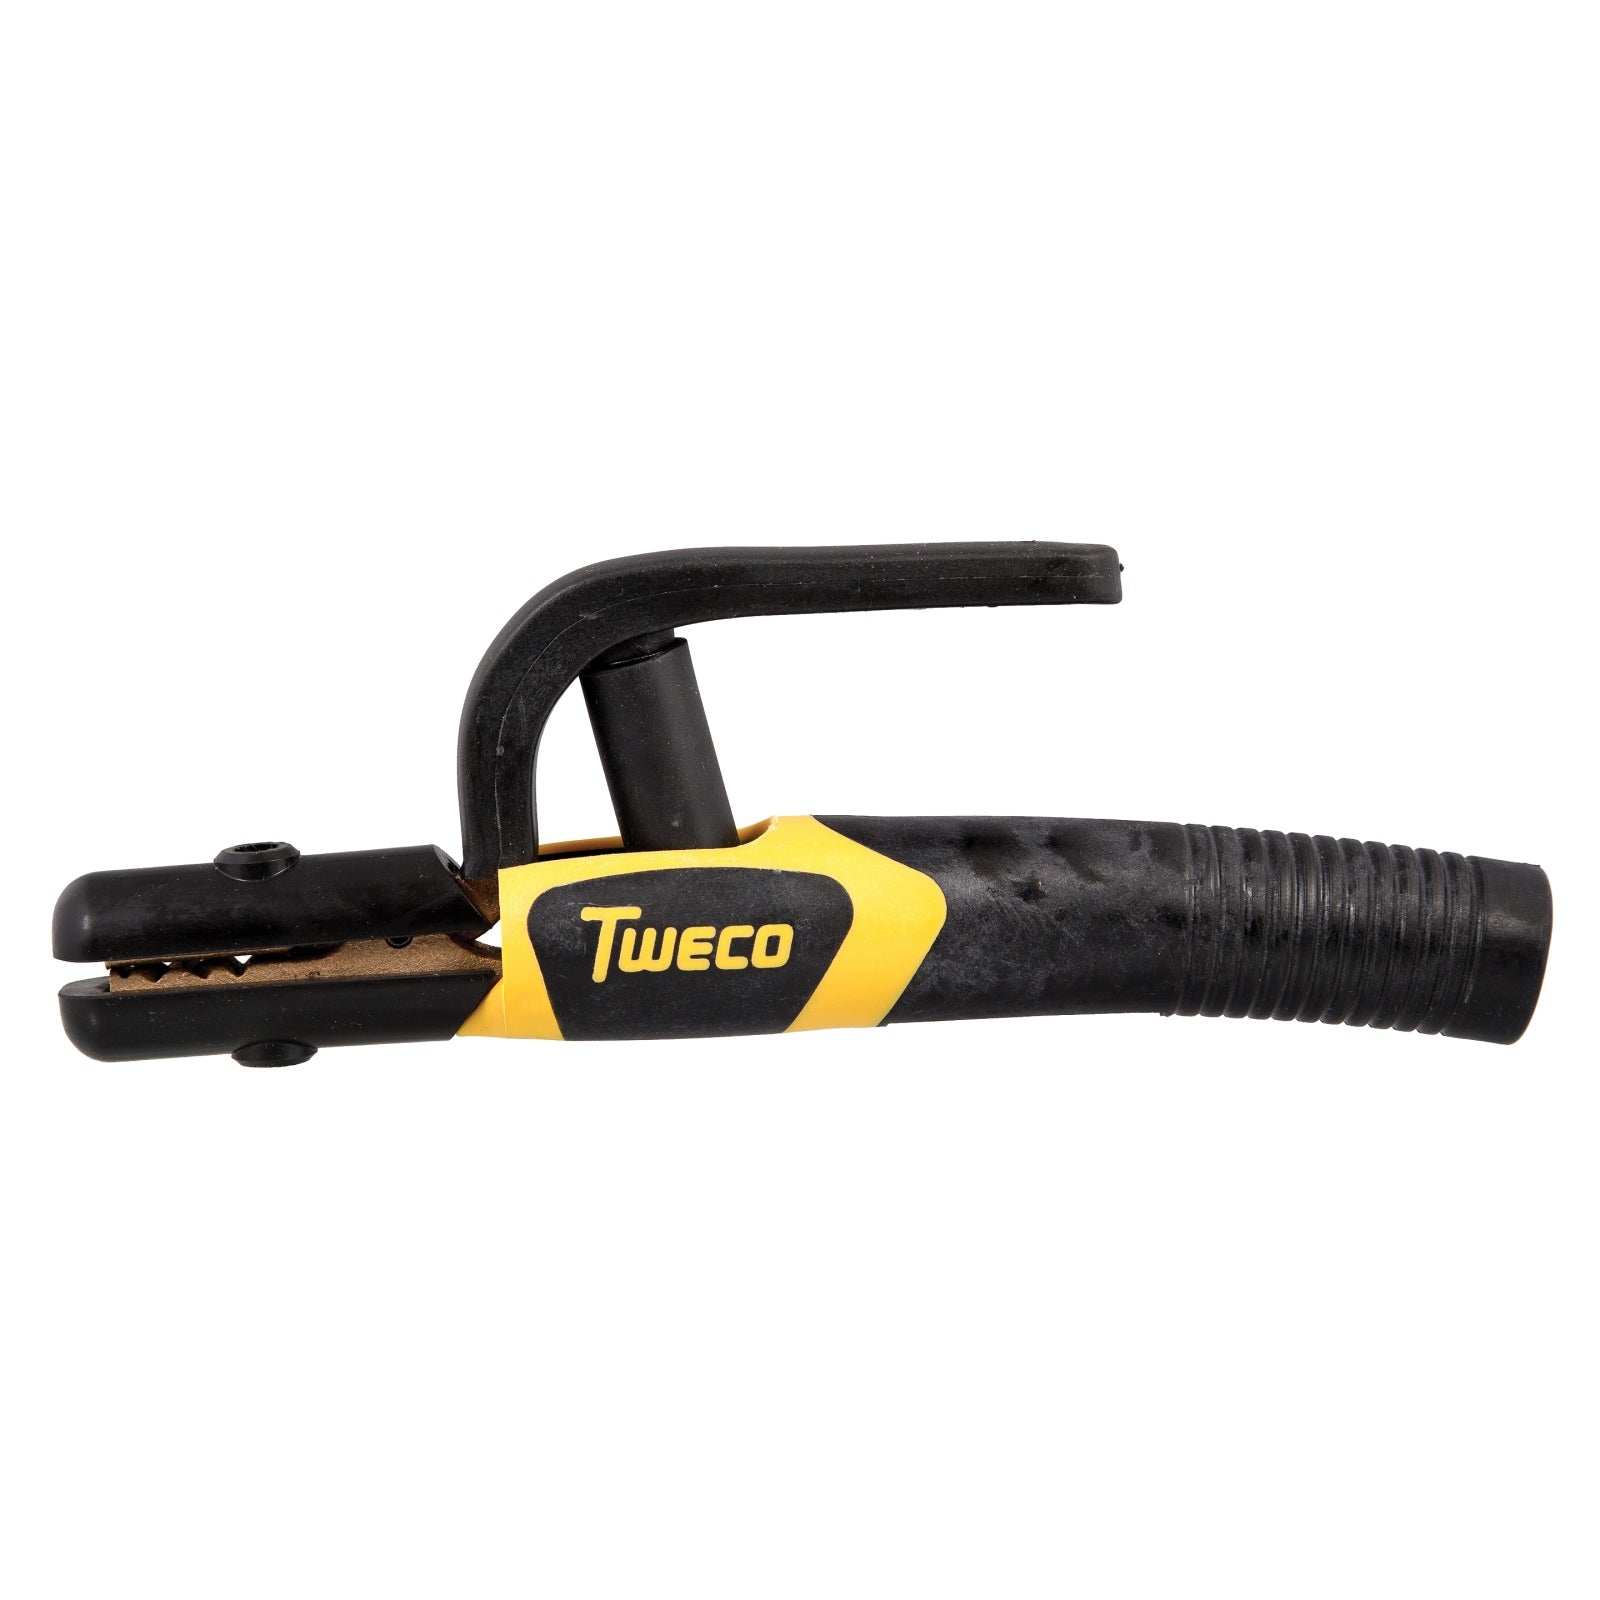 Tweco TwecoTong 300 AMP Electrode Holder (T-732)